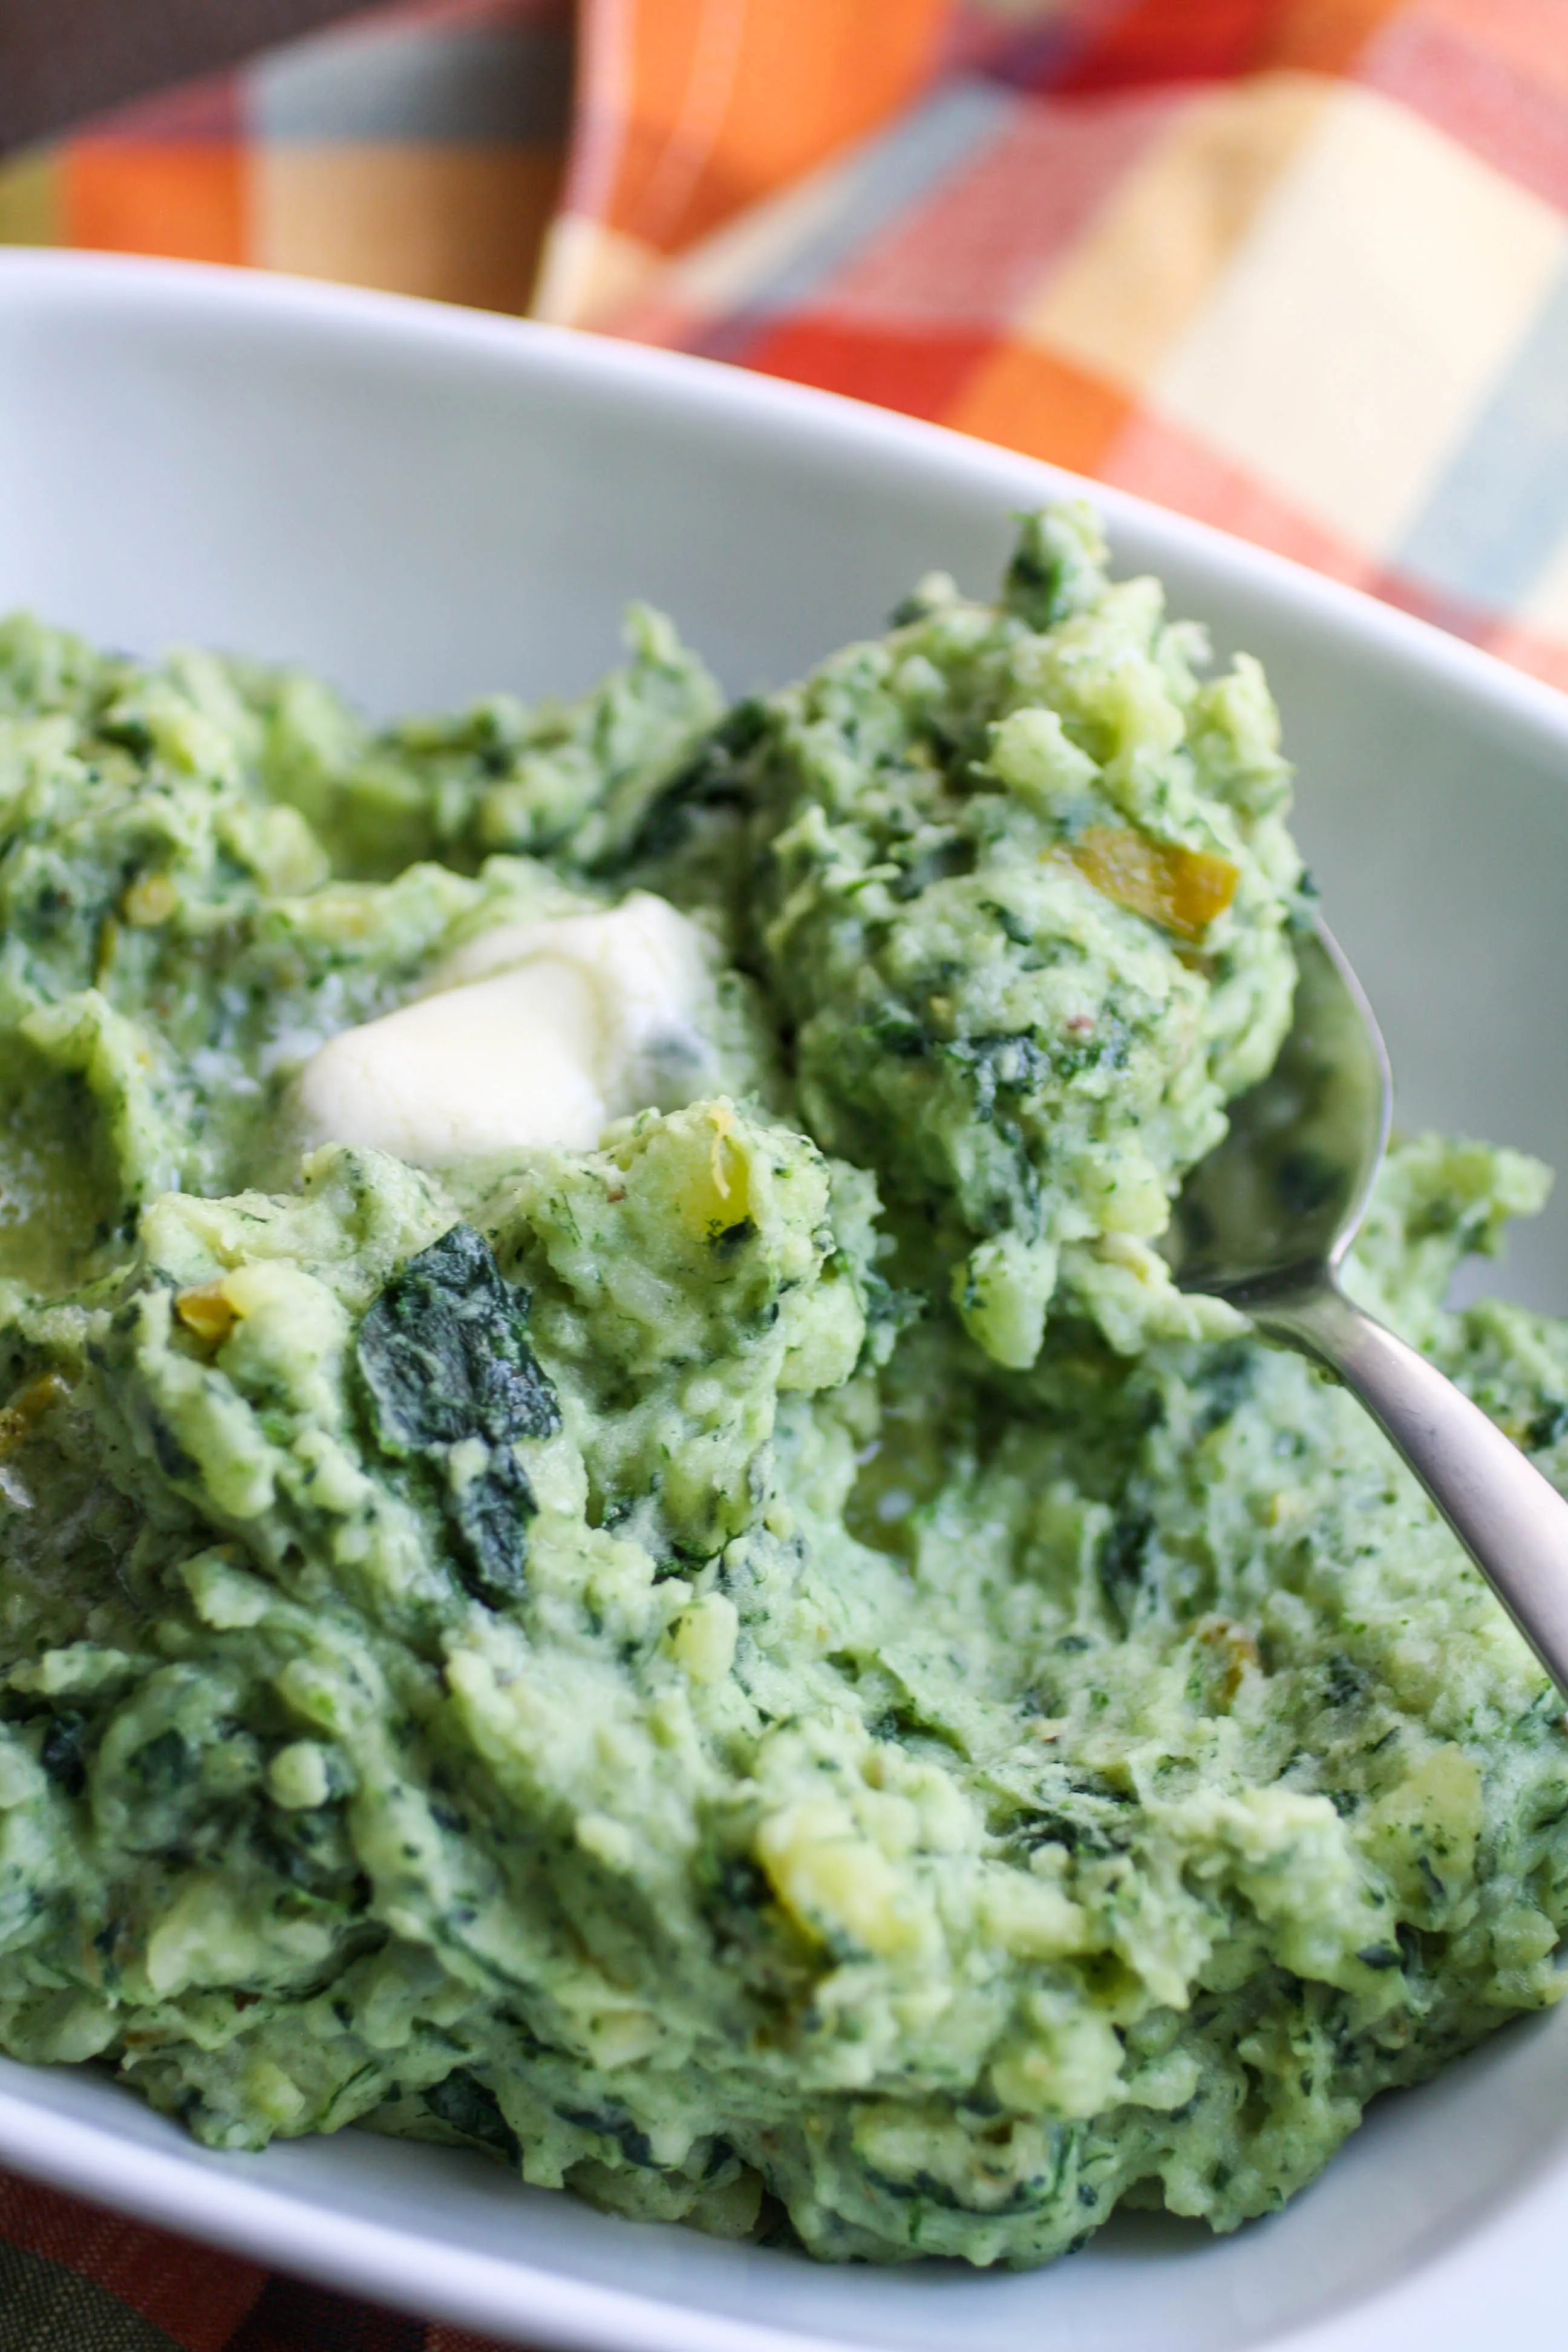 Southwestern Kale Colcannon makes a great side to any main dish. The potatoes are complemented by kale and green chiles!